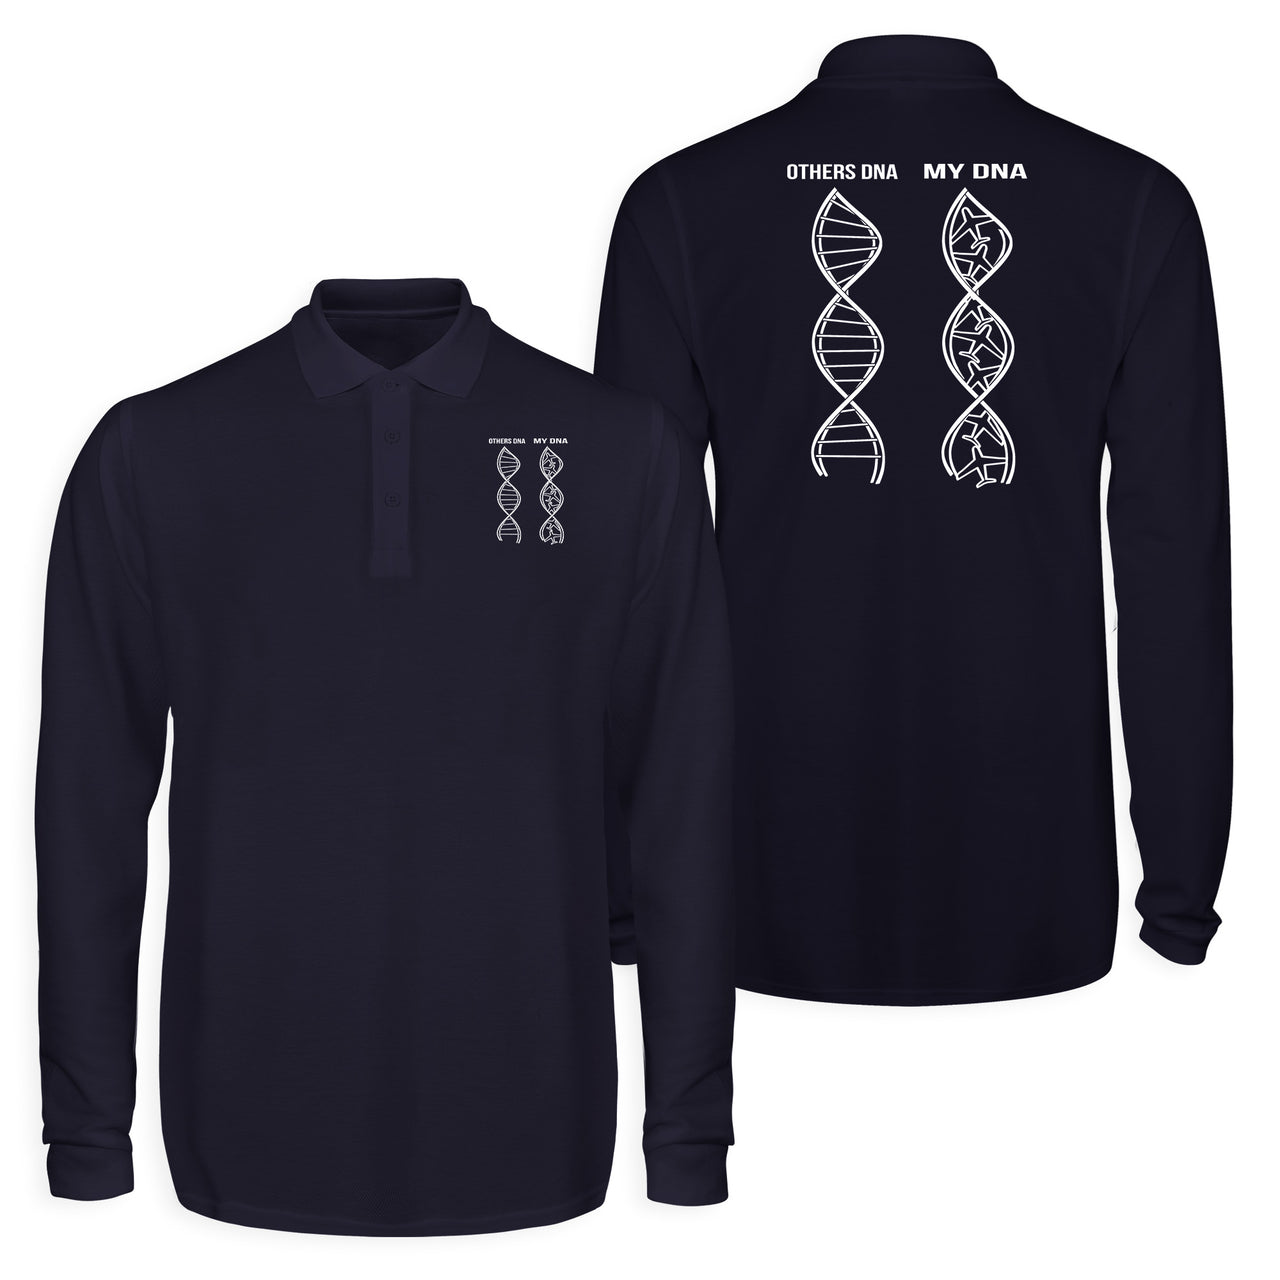 Aviation DNA Designed Long Sleeve Polo T-Shirts (Double-Side)